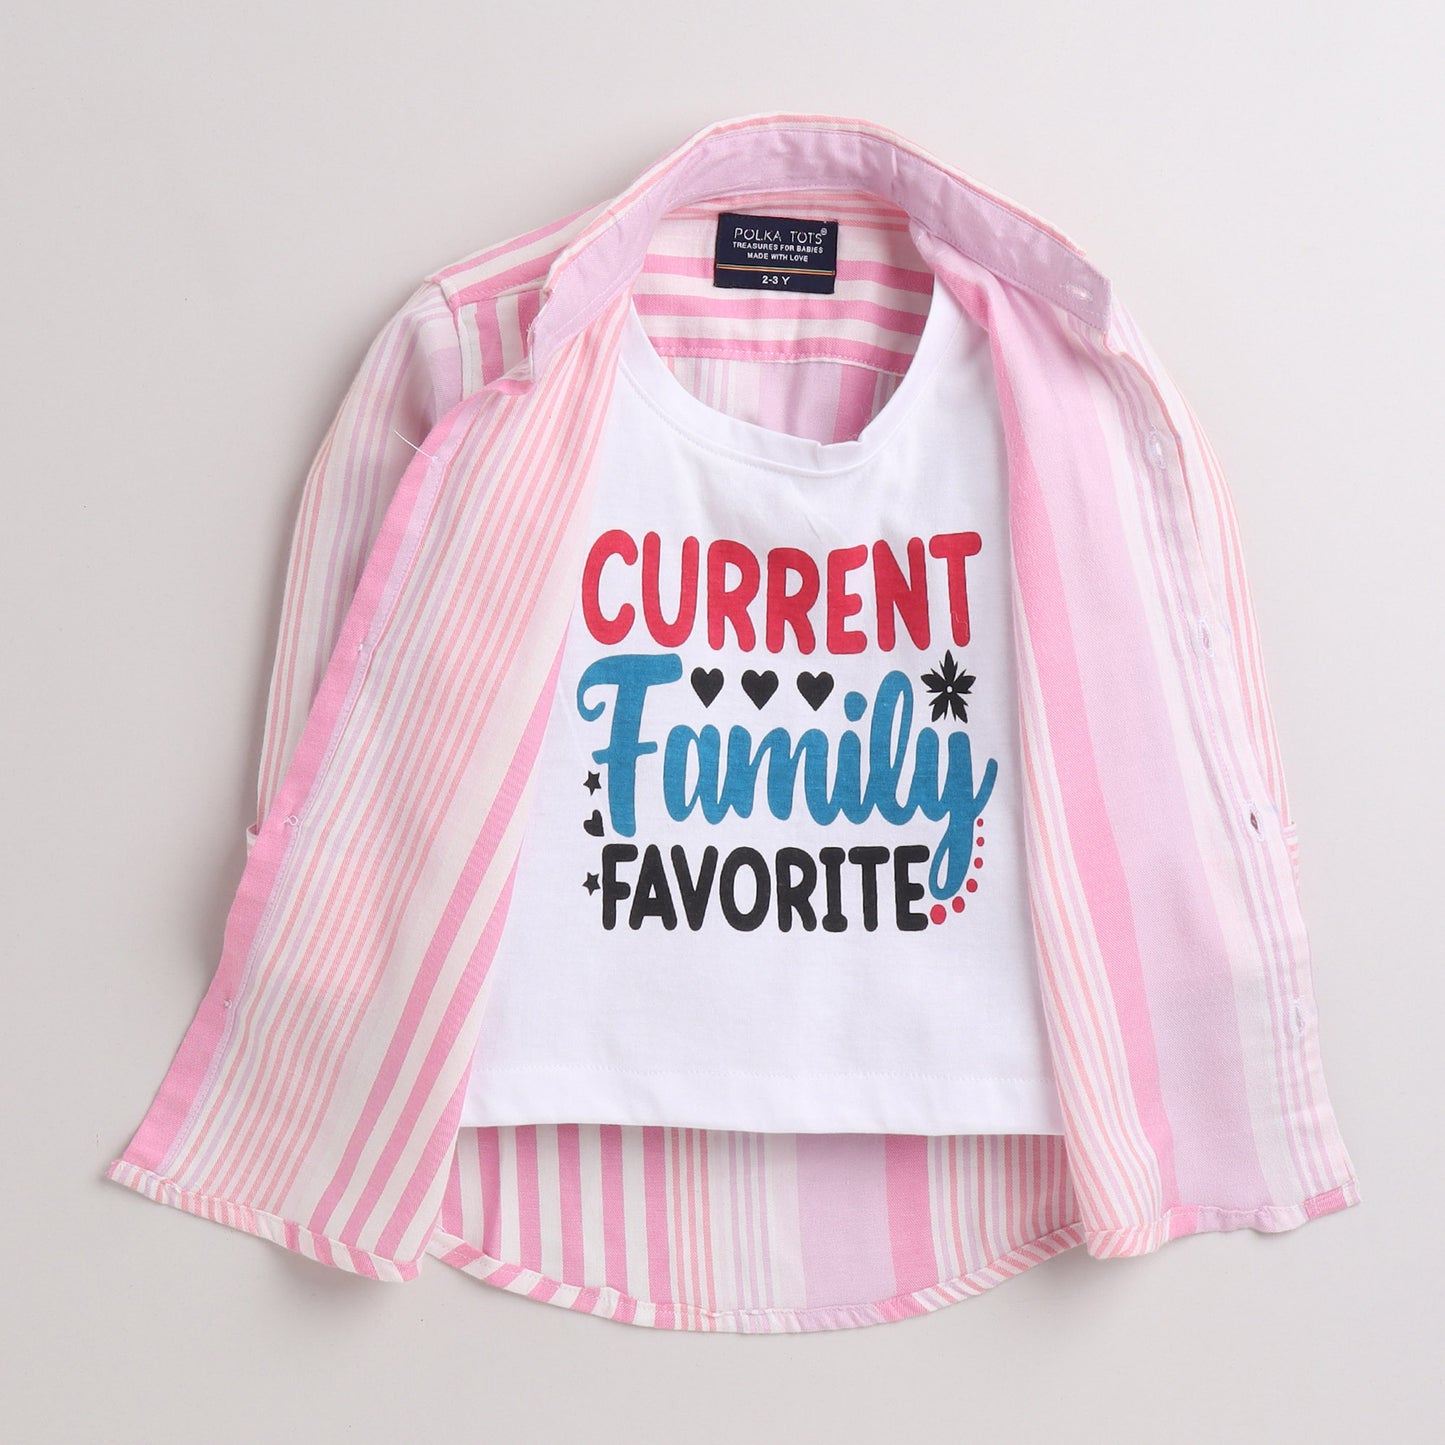 Polka Tots Full Sleeve Shirt With Attached Tshirt Family Favourite Print - Pink